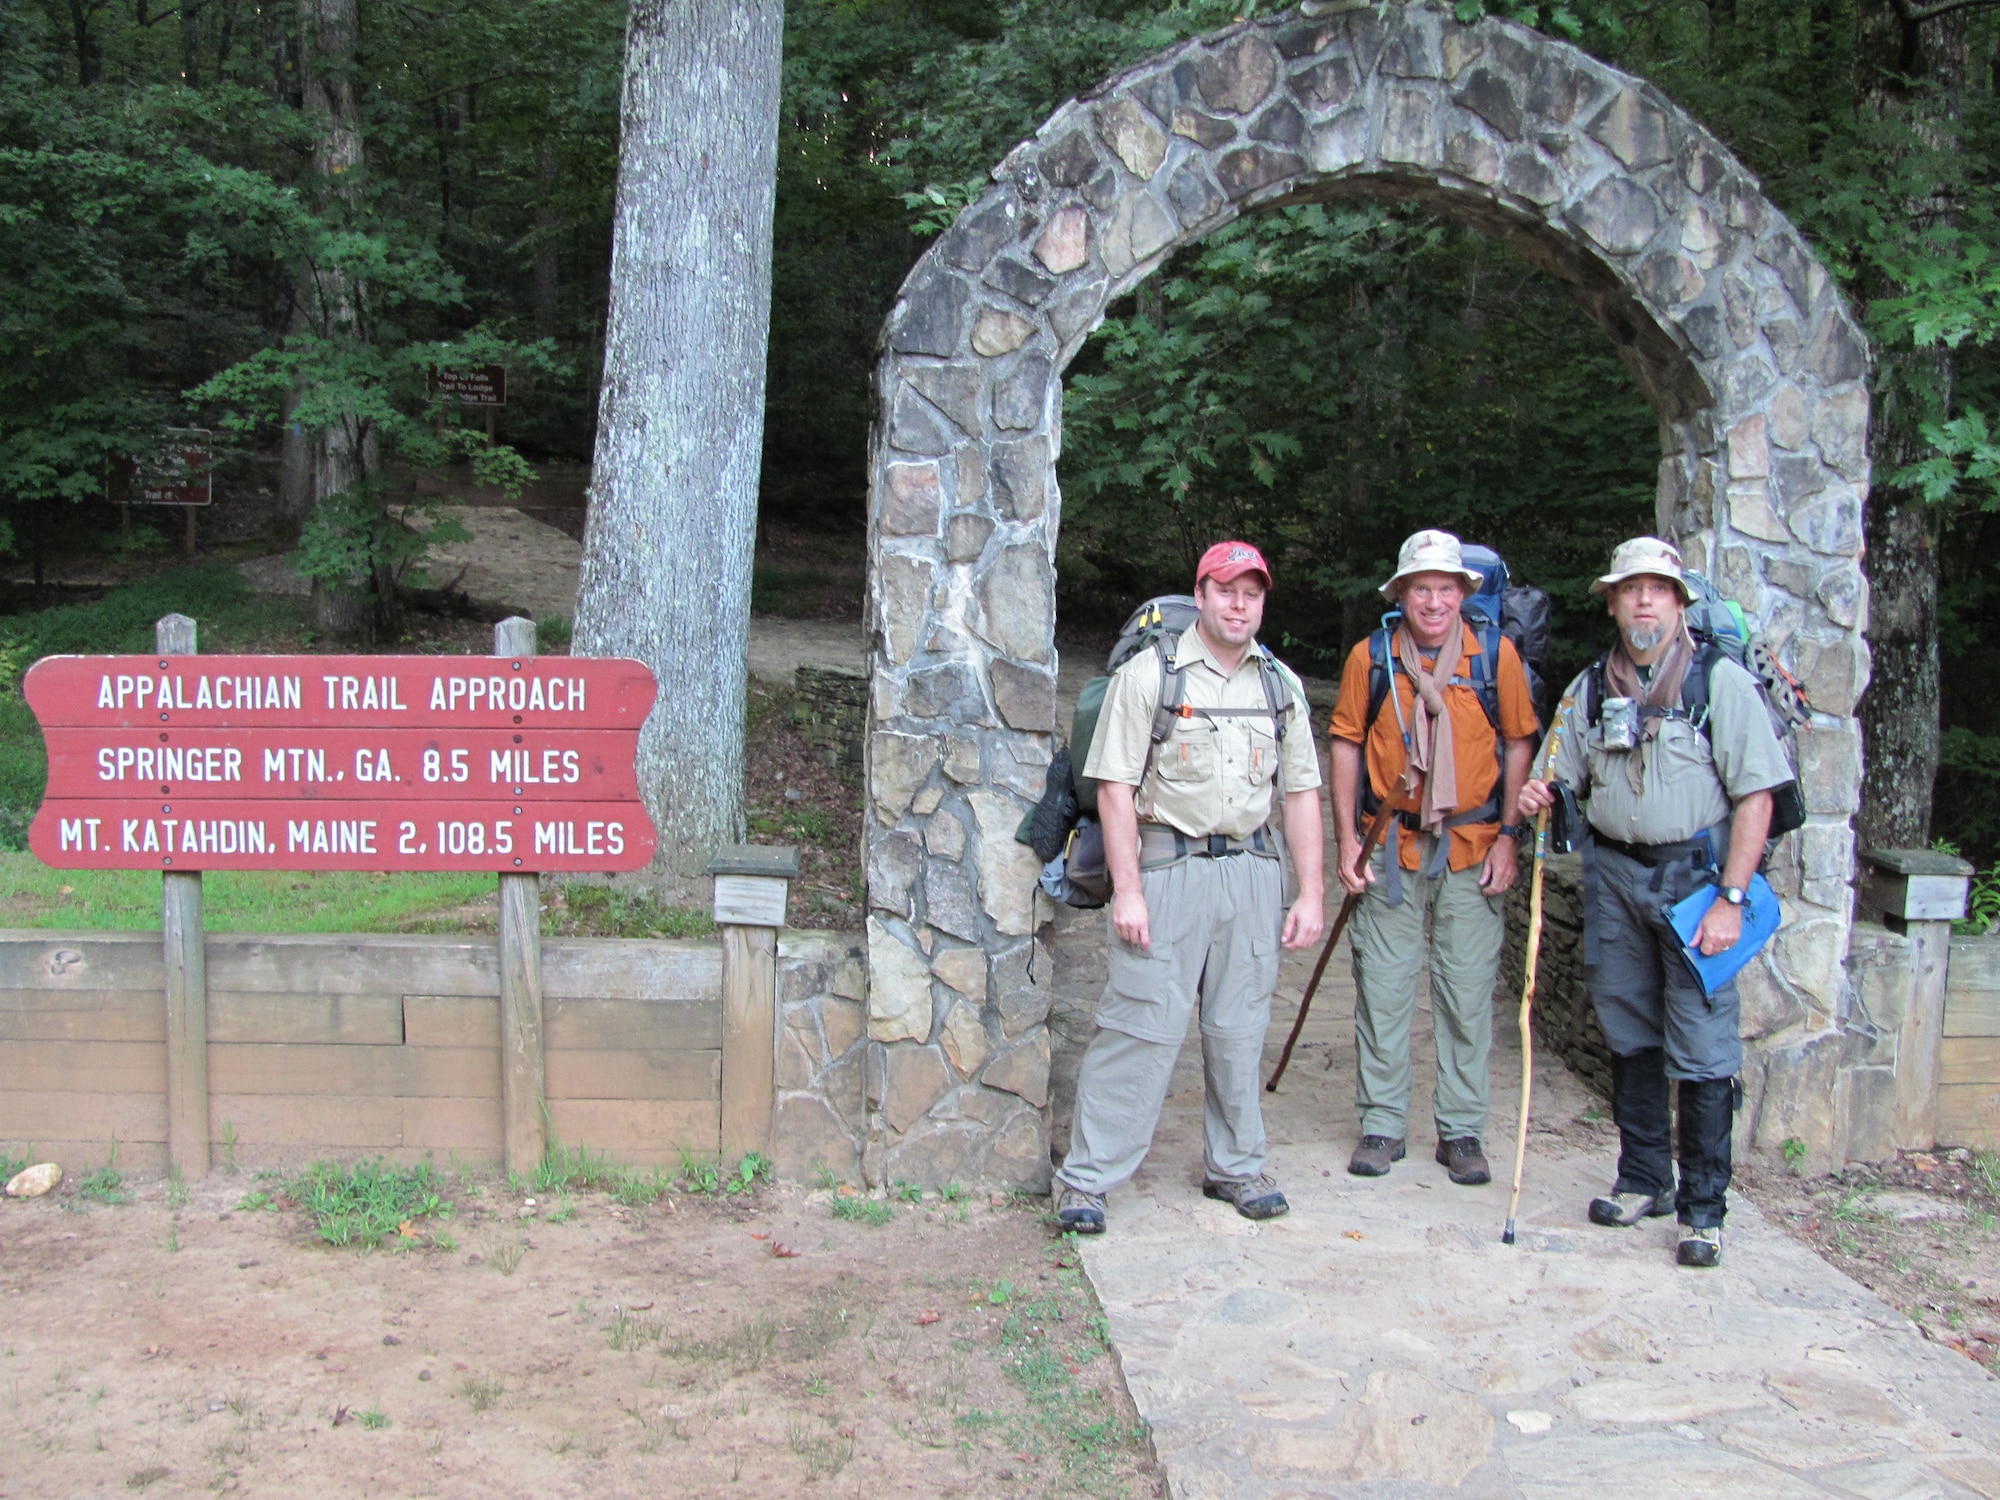 (From left) Jerry Eubank, Carter Martin and Rob Ligas set out on the Appalachian Trail approach from Amicalola Falls, Georgia, on Aug. 26, 2010. Eubank hiked the first three years with Ligas, a retired Airman and civilian employee at Wright-Patterson Air Force Base, Ohio, who completed the full 2,198-mile journey this past summer. (Contributed photo)